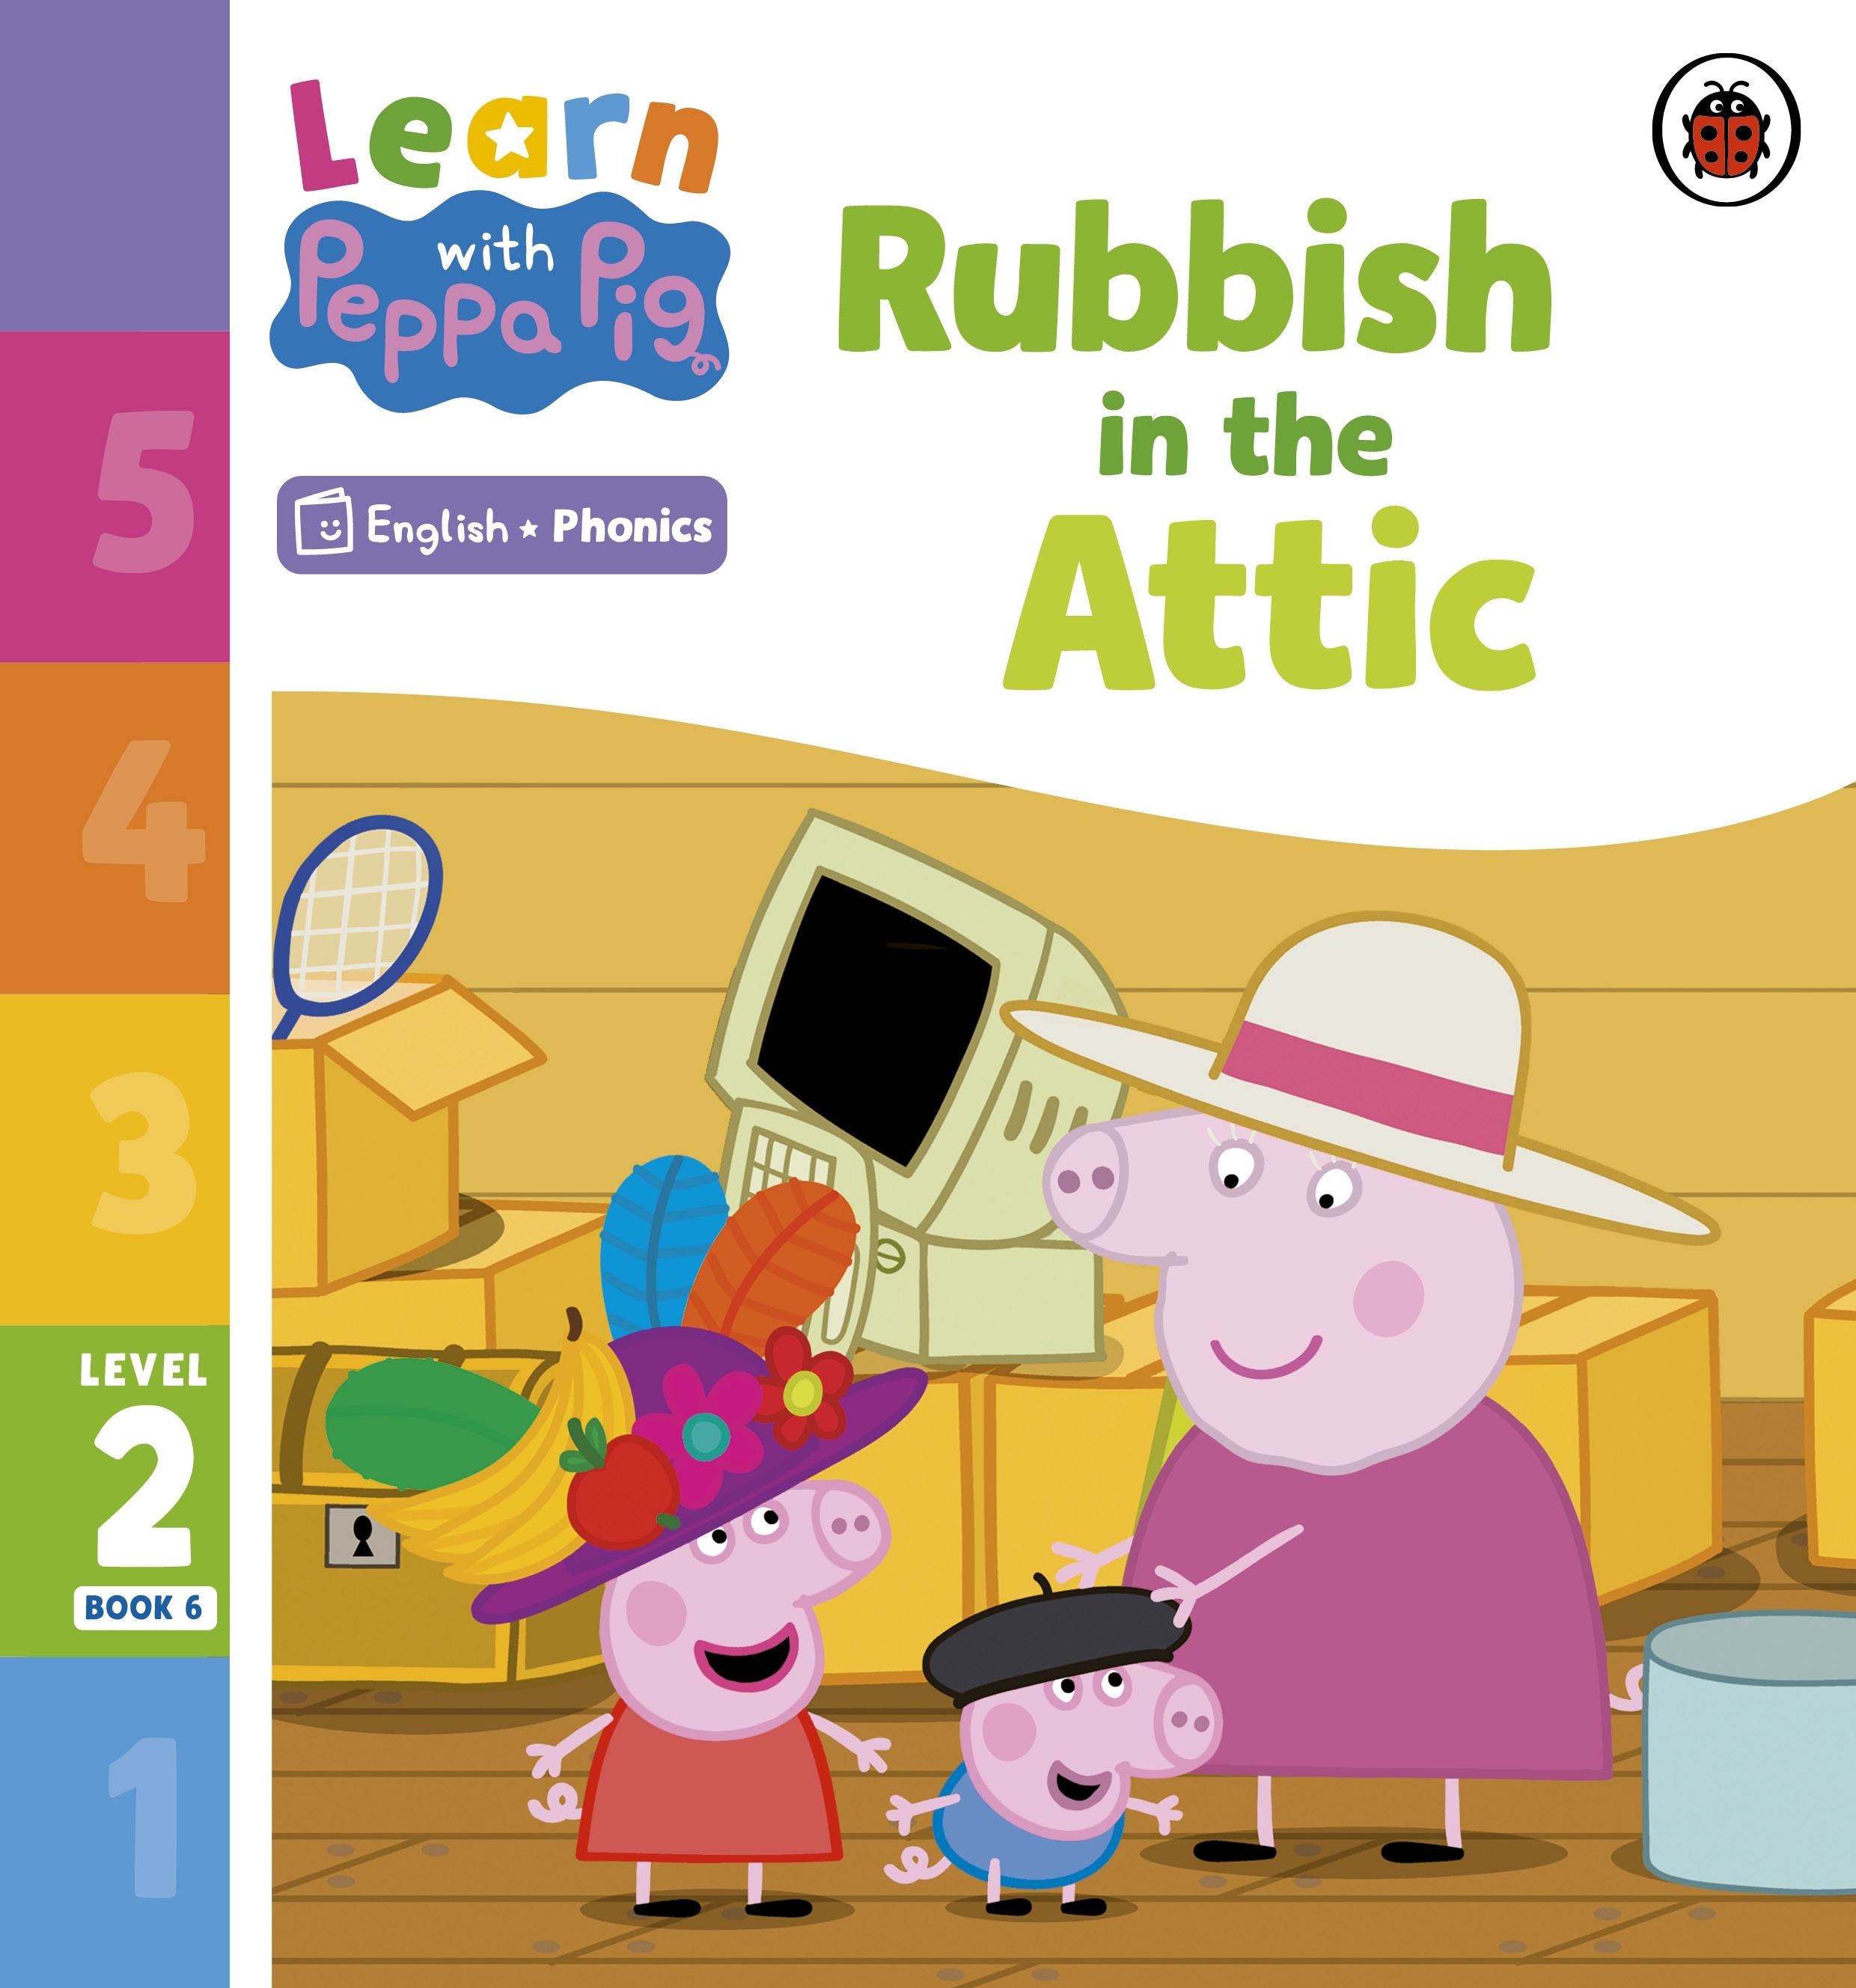 Book “Learn with Peppa Phonics Level 2 Book 6 — Rubbish in the Attic (Phonics Reader)” by Peppa Pig — January 5, 2023